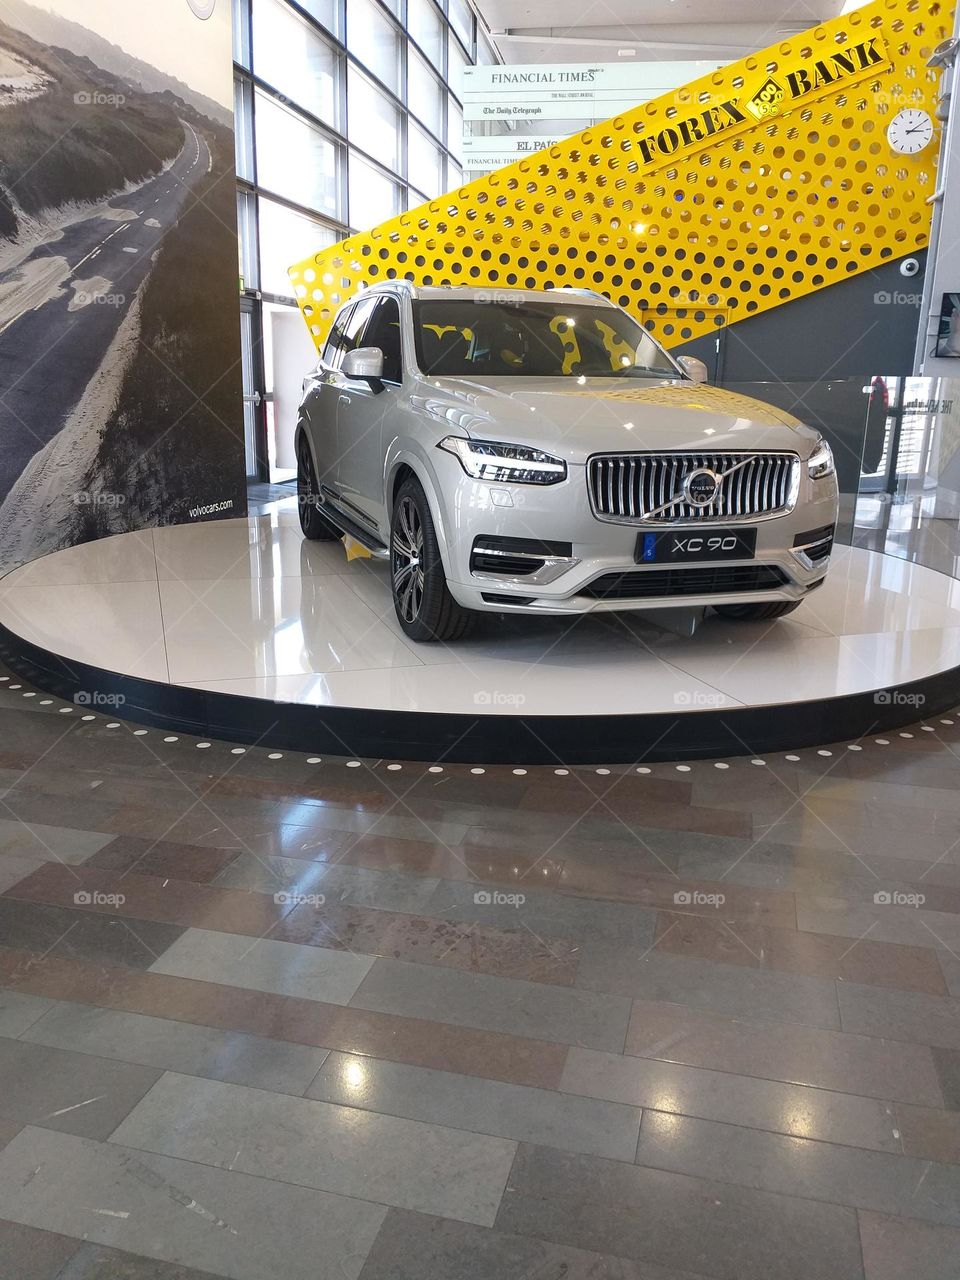 Volvo XC90 in Oslo airport. Luxury SUV offering important safety features.